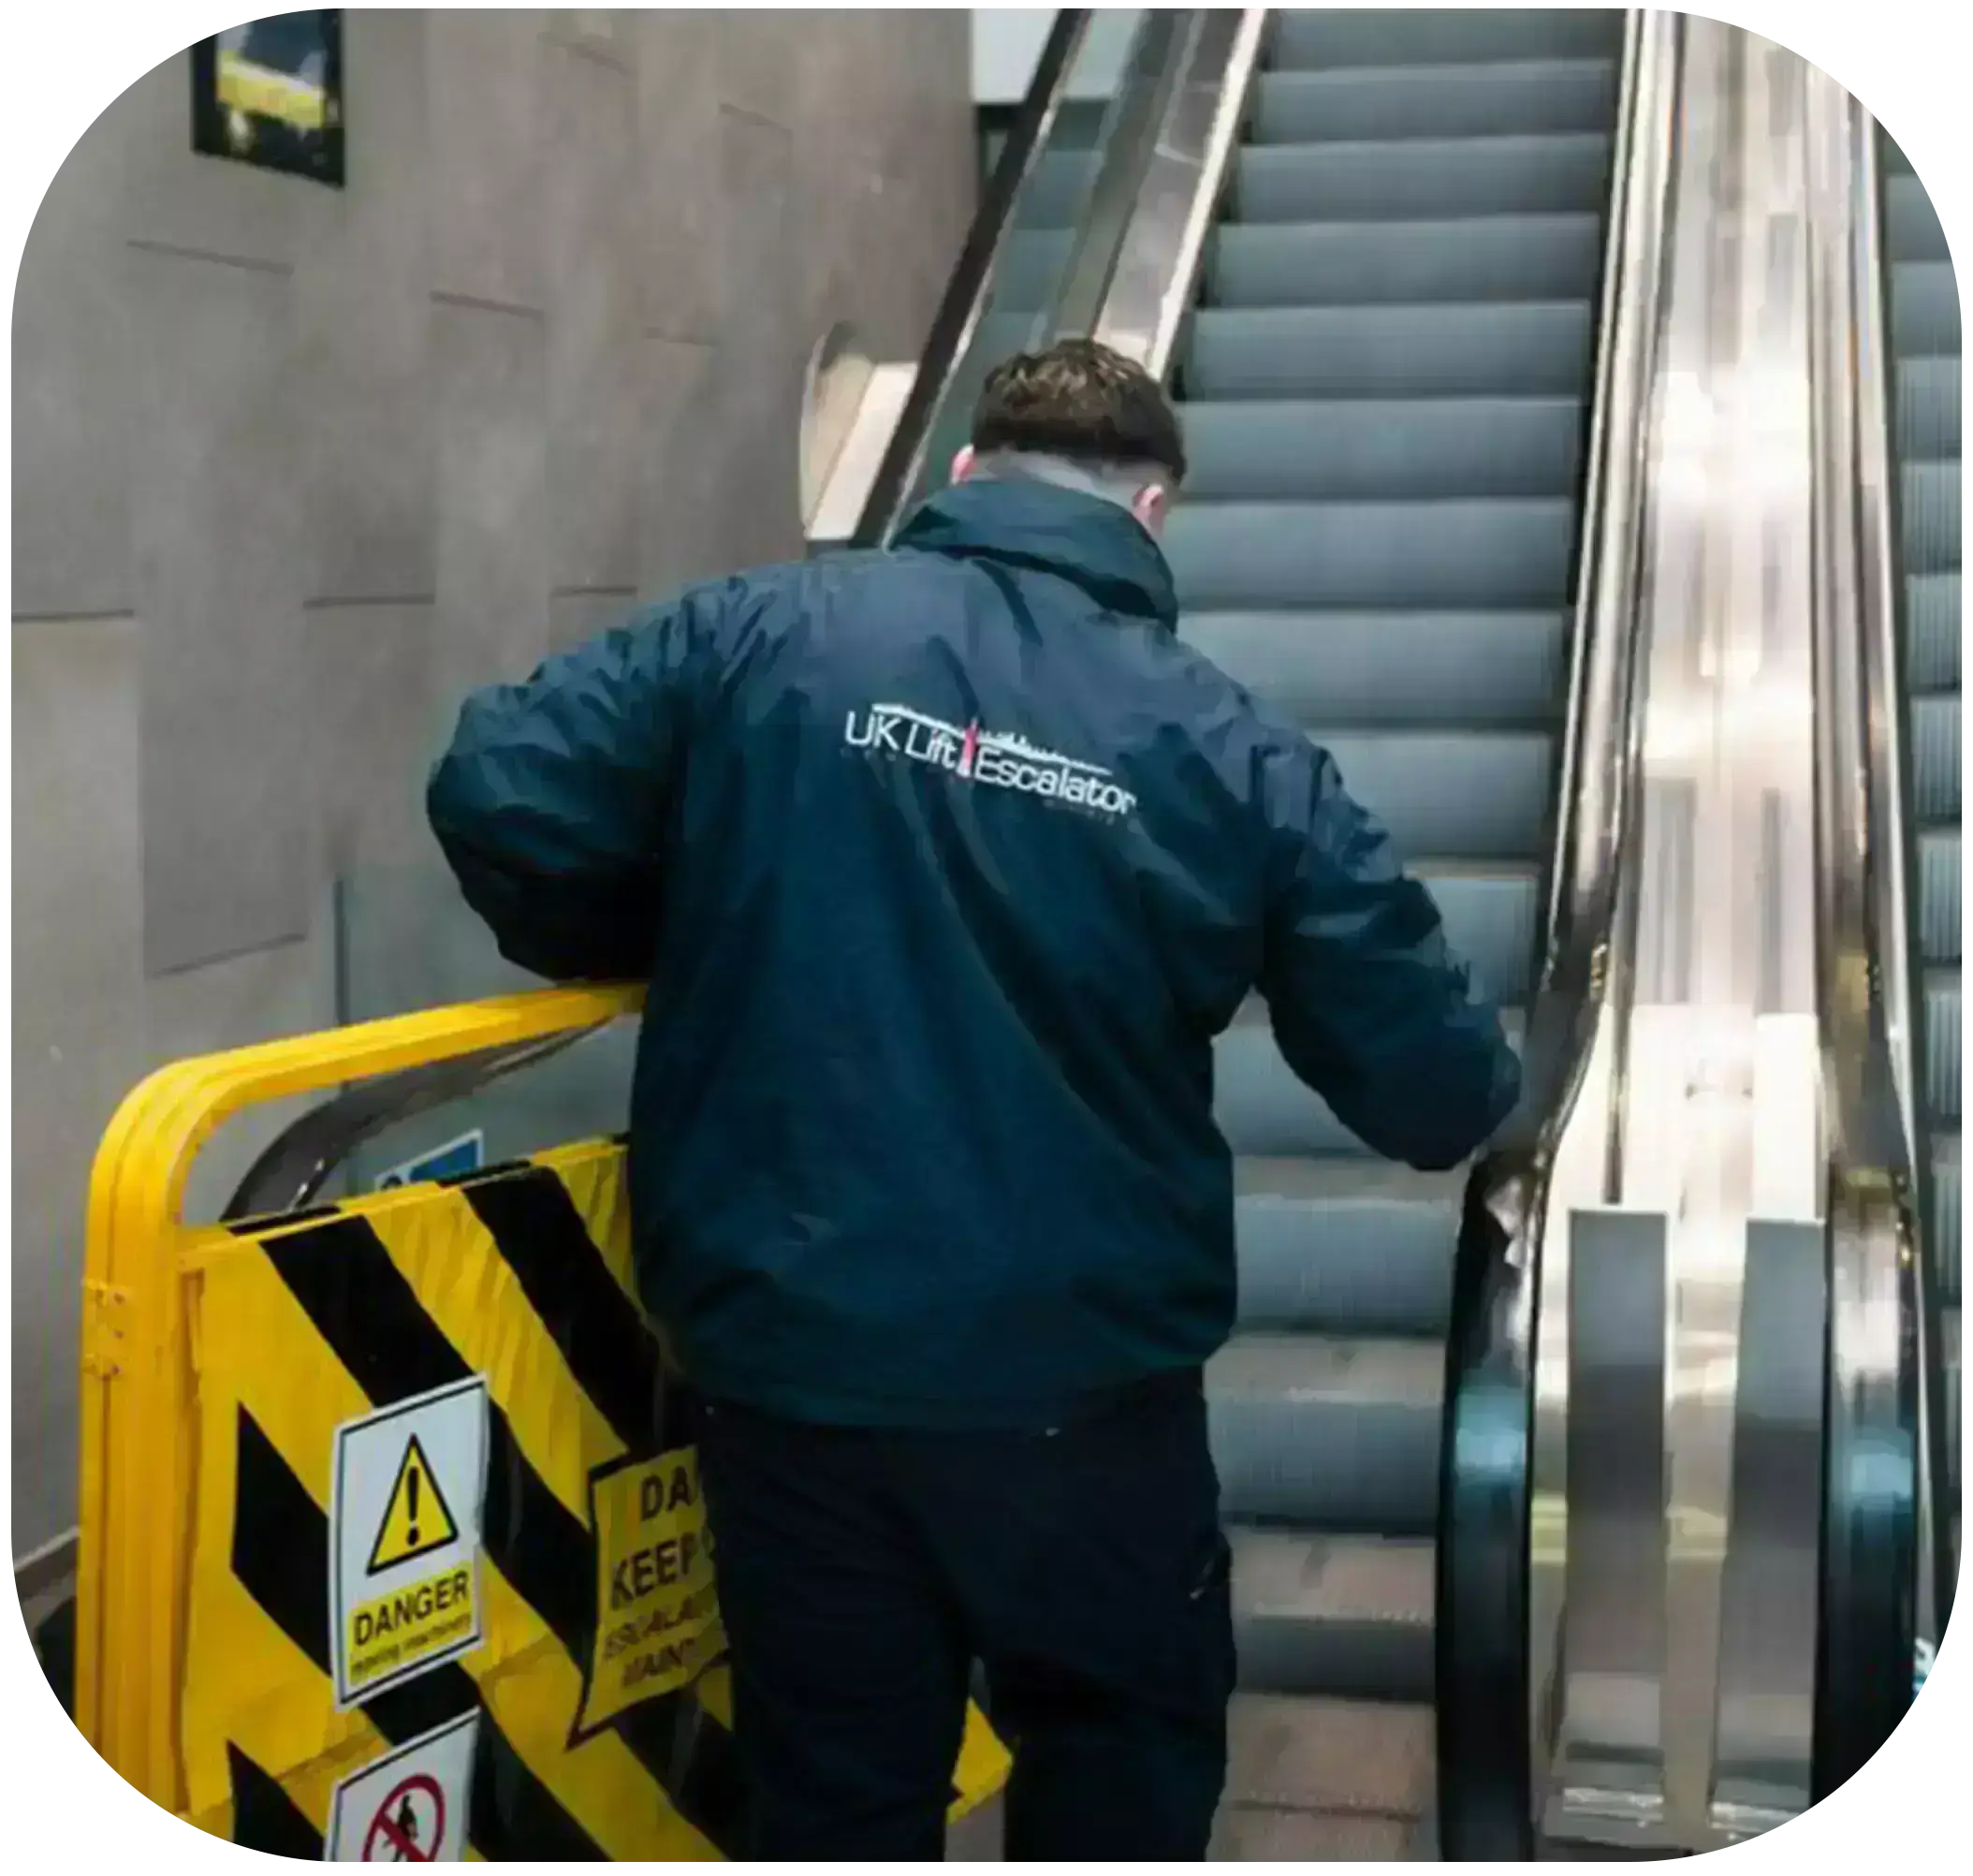 While walking the technician examines the lifts and escalators.